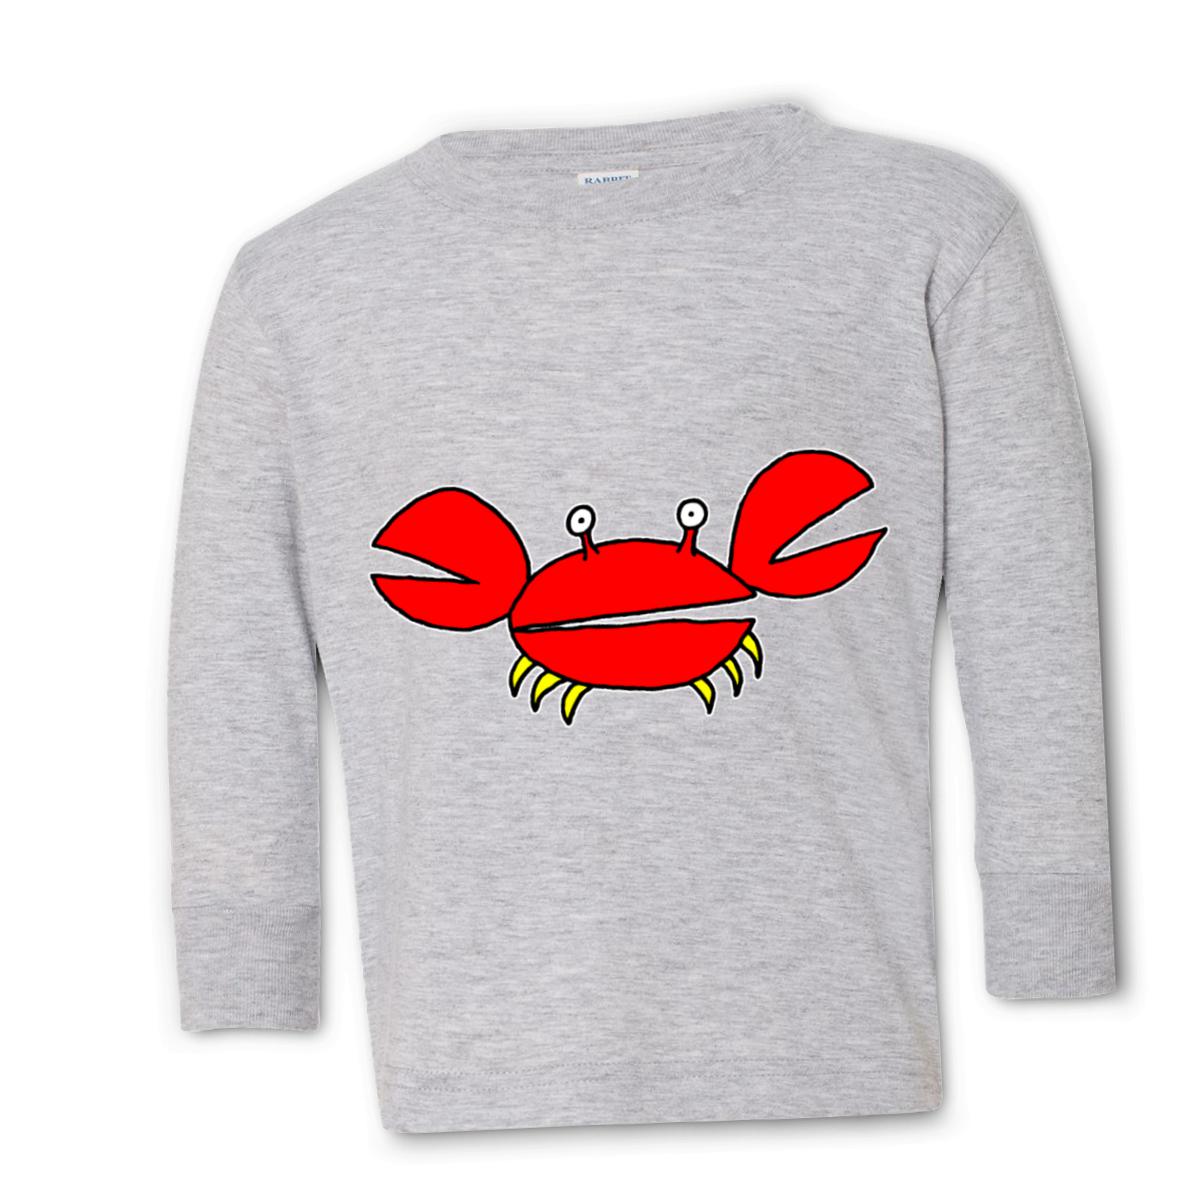 Crab Toddler Long Sleeve Tee 56T heather